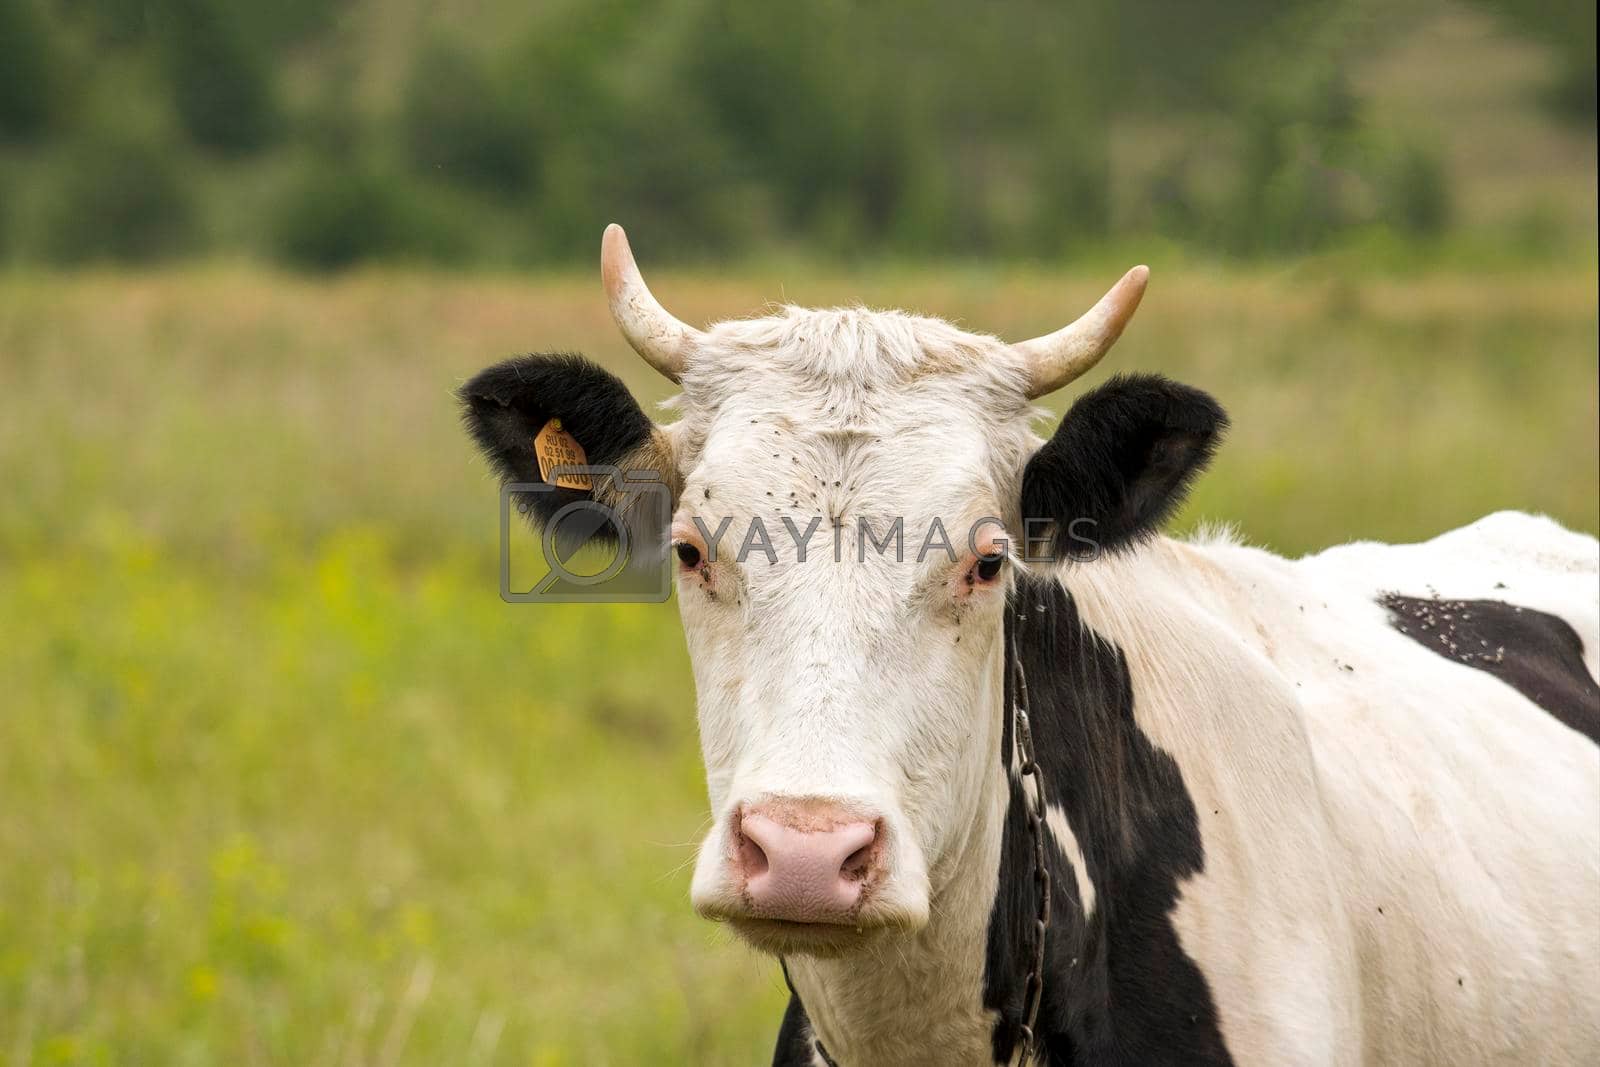 Royalty free image of White cow in pasture against backdrop of forest. by Essffes